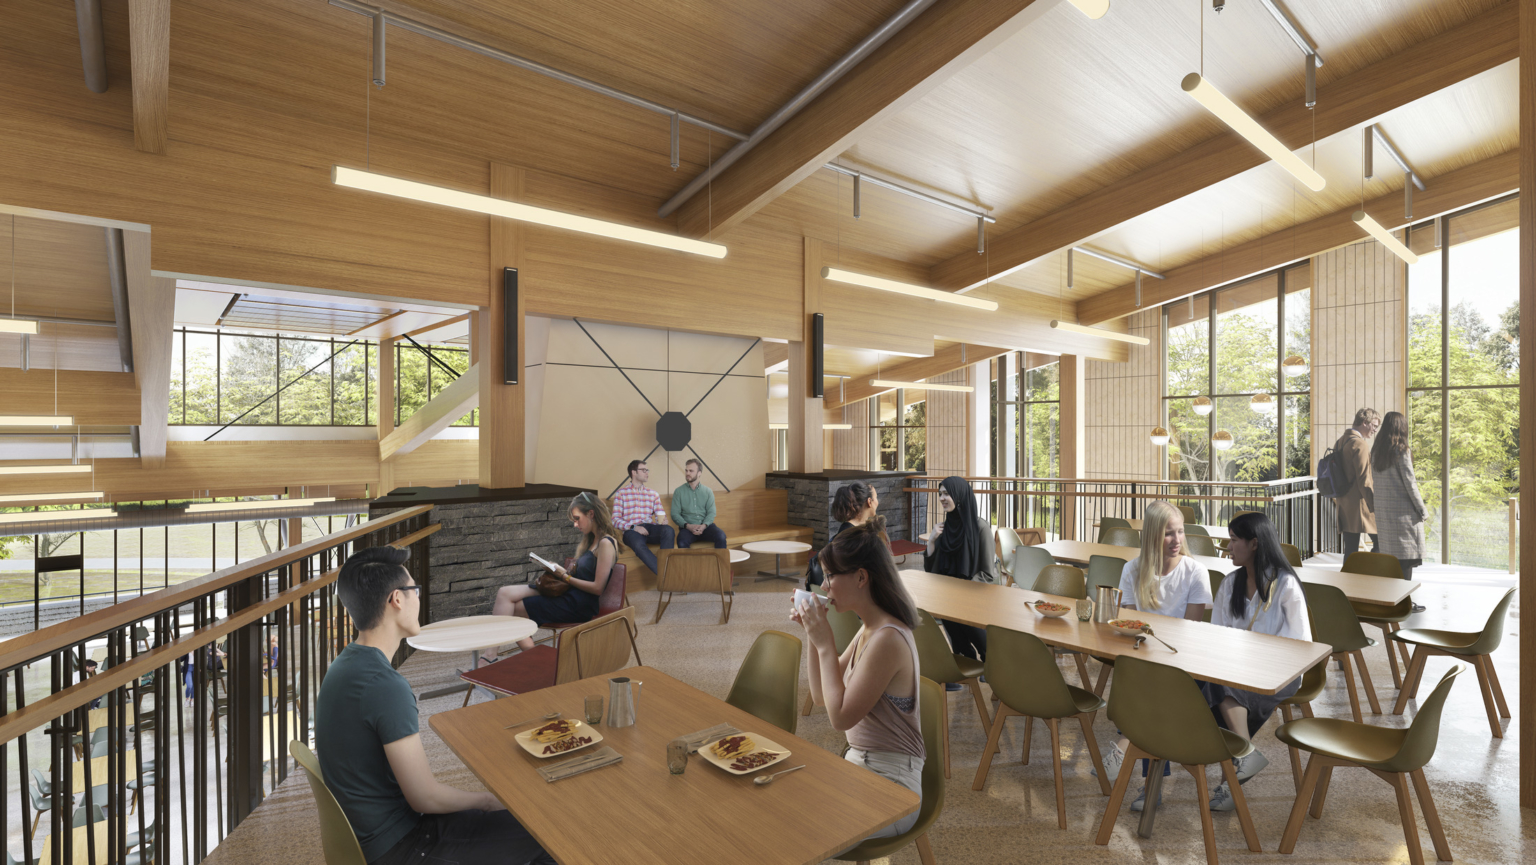 Upper dining area with stone accent wall, wood ceilings, and beams. There is a black iron railing overlooking the main floor dining area at Swarthmore College Dining and Community Commons.